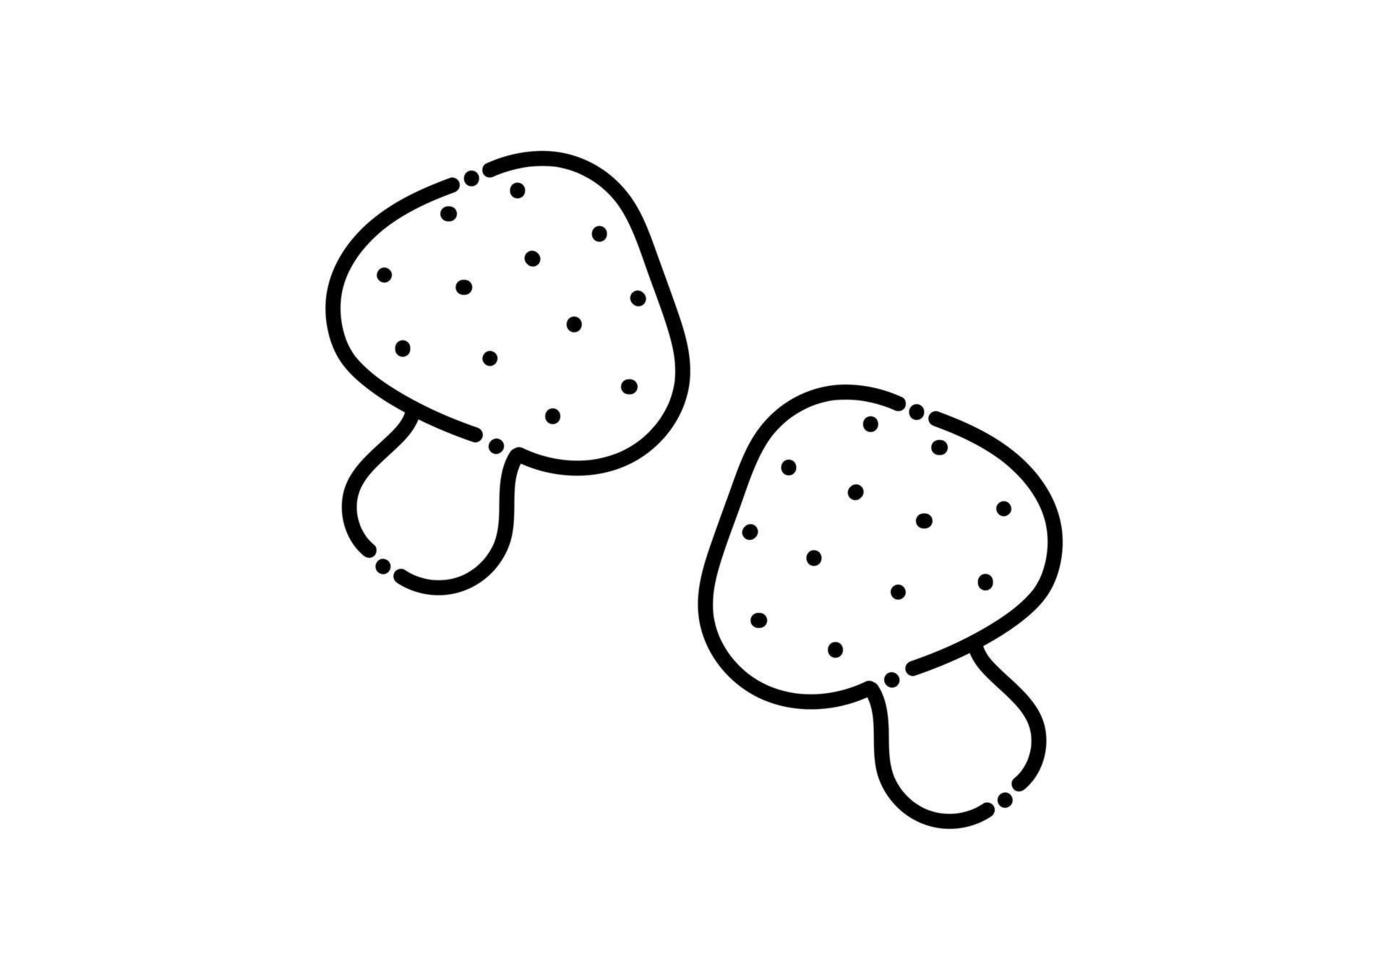 mushroom illustration in dotted line style vector